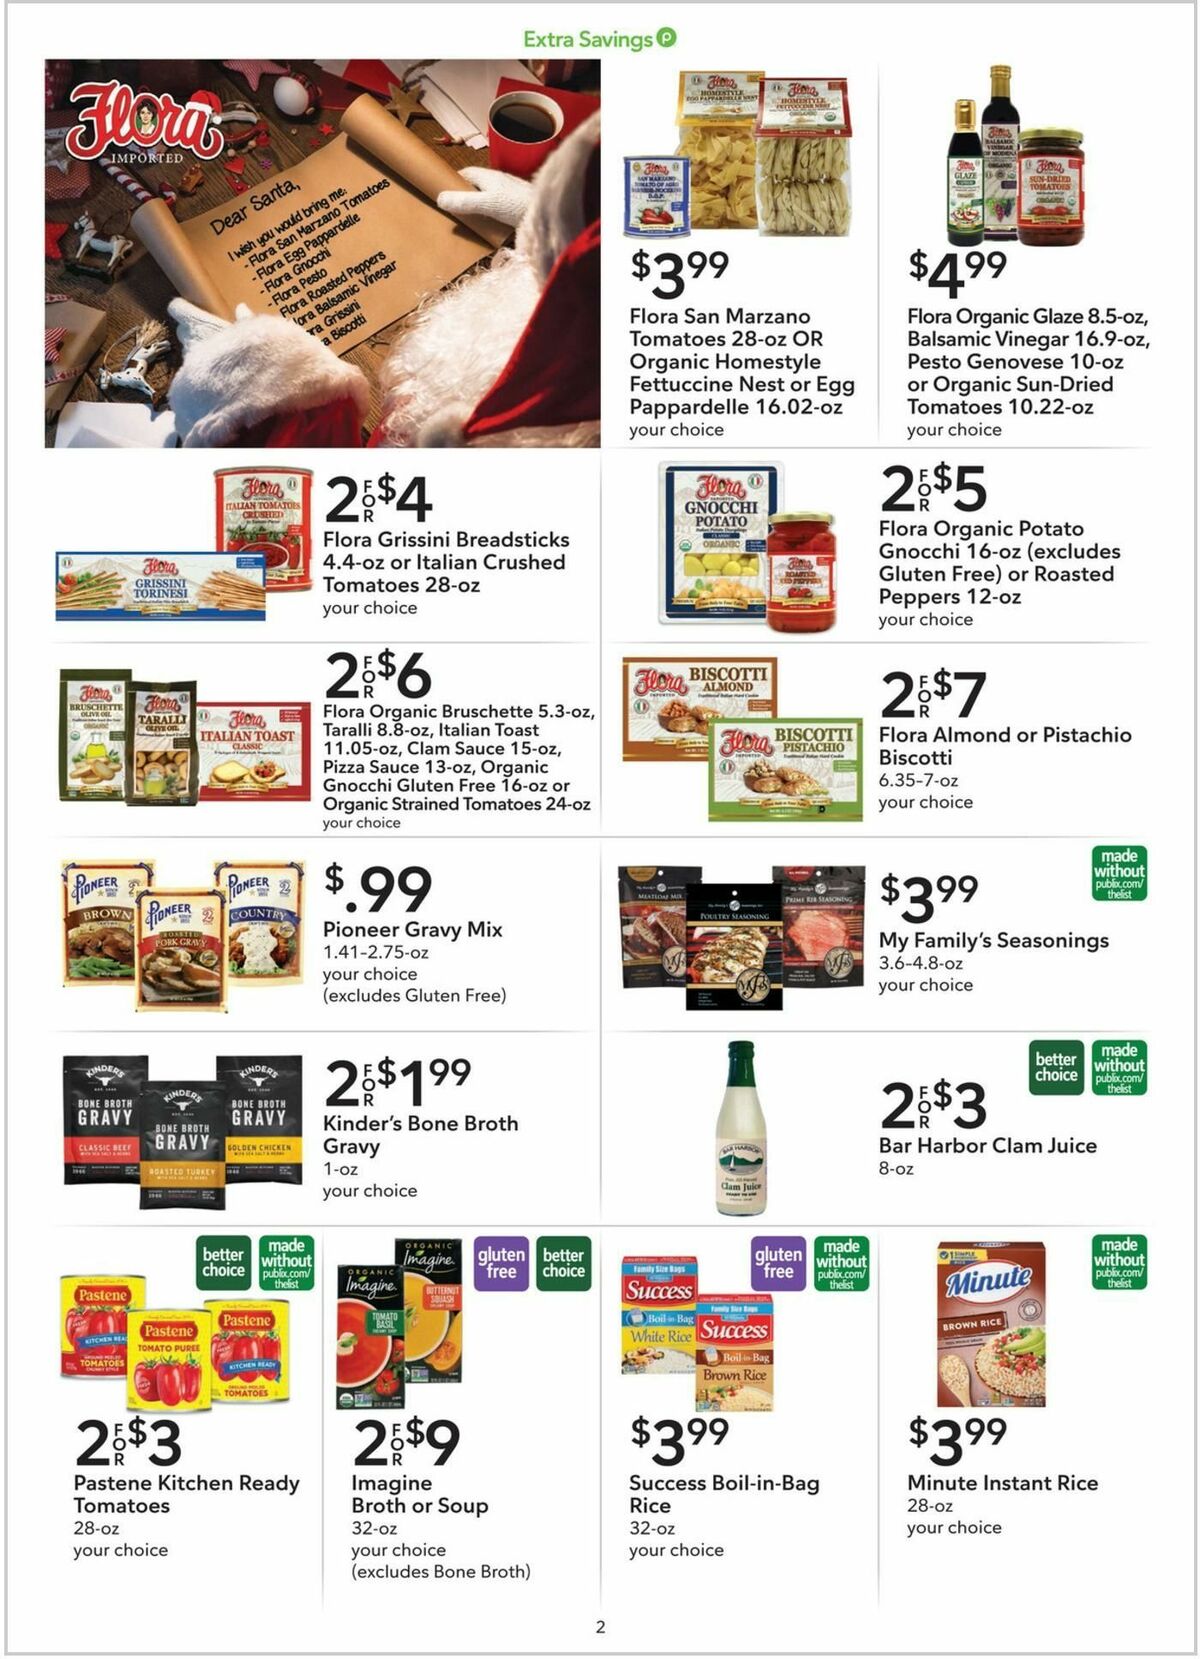 Publix Extra Savings Weekly Ad from December 16